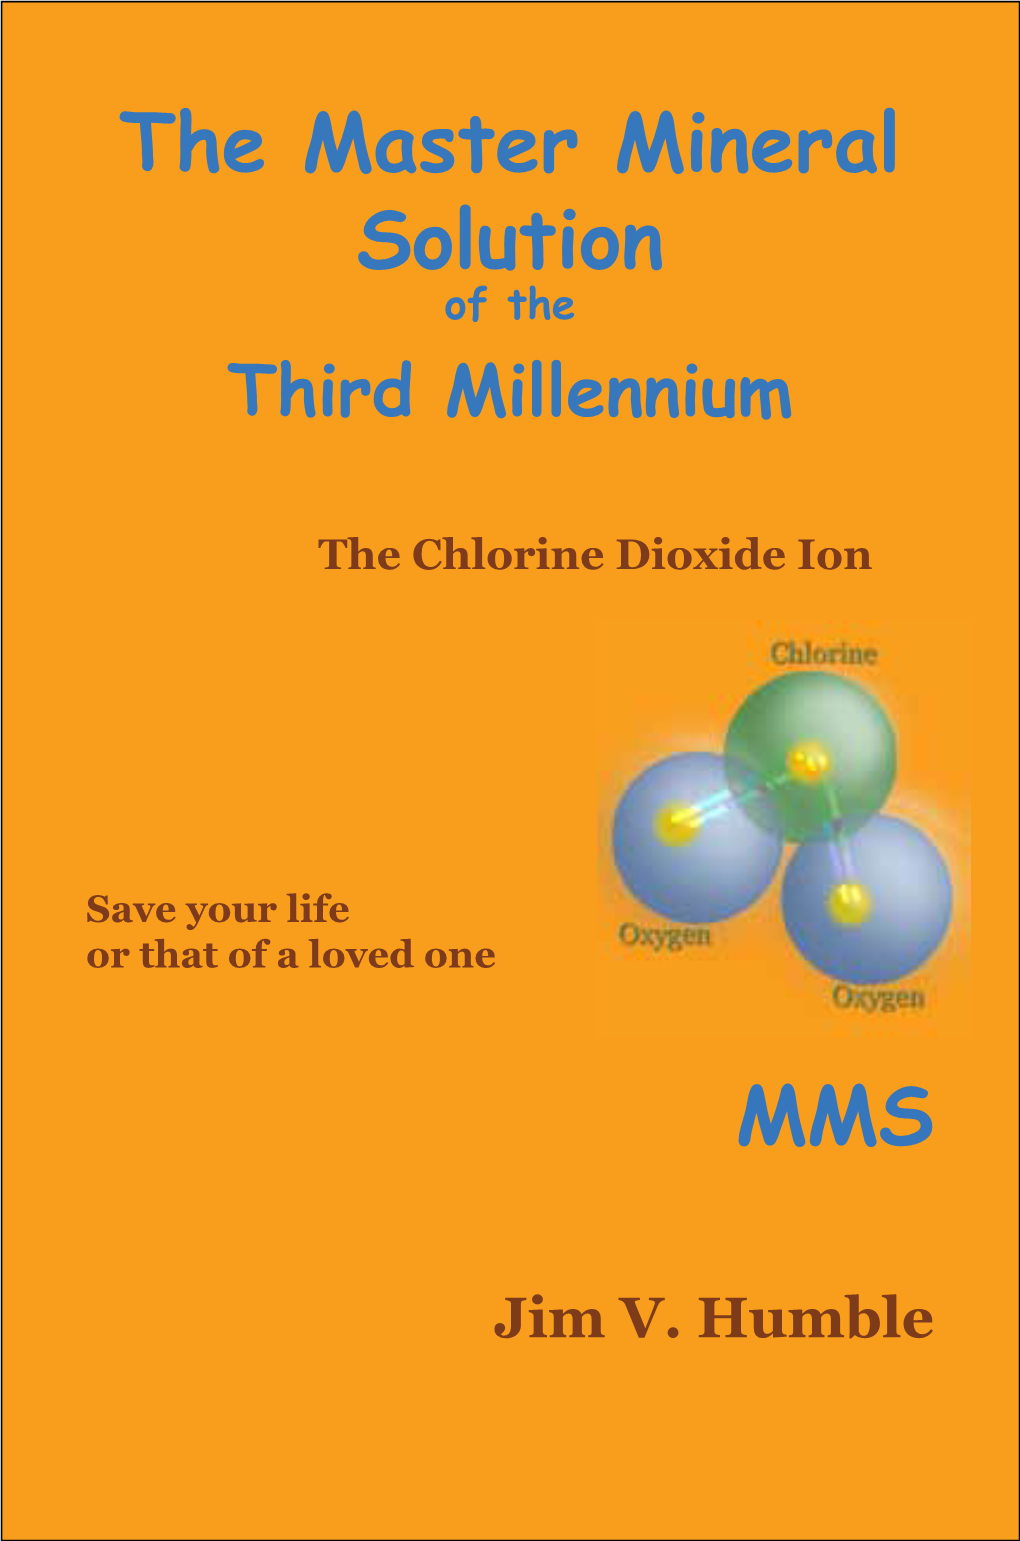 The Master Mineral of the Third Millennium